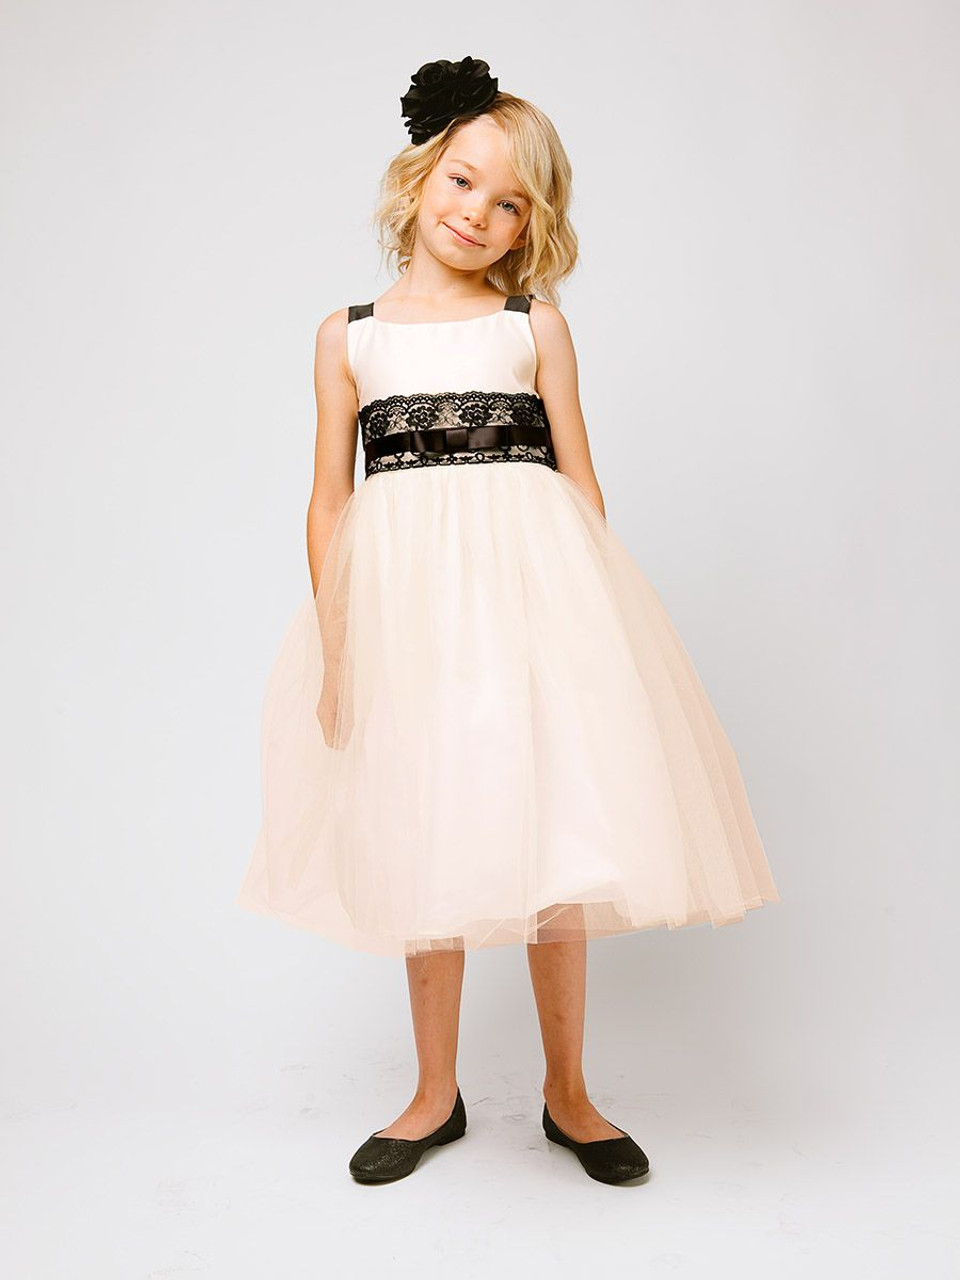 Champagne Satin & Tulle Lace Dress - Pink Princess